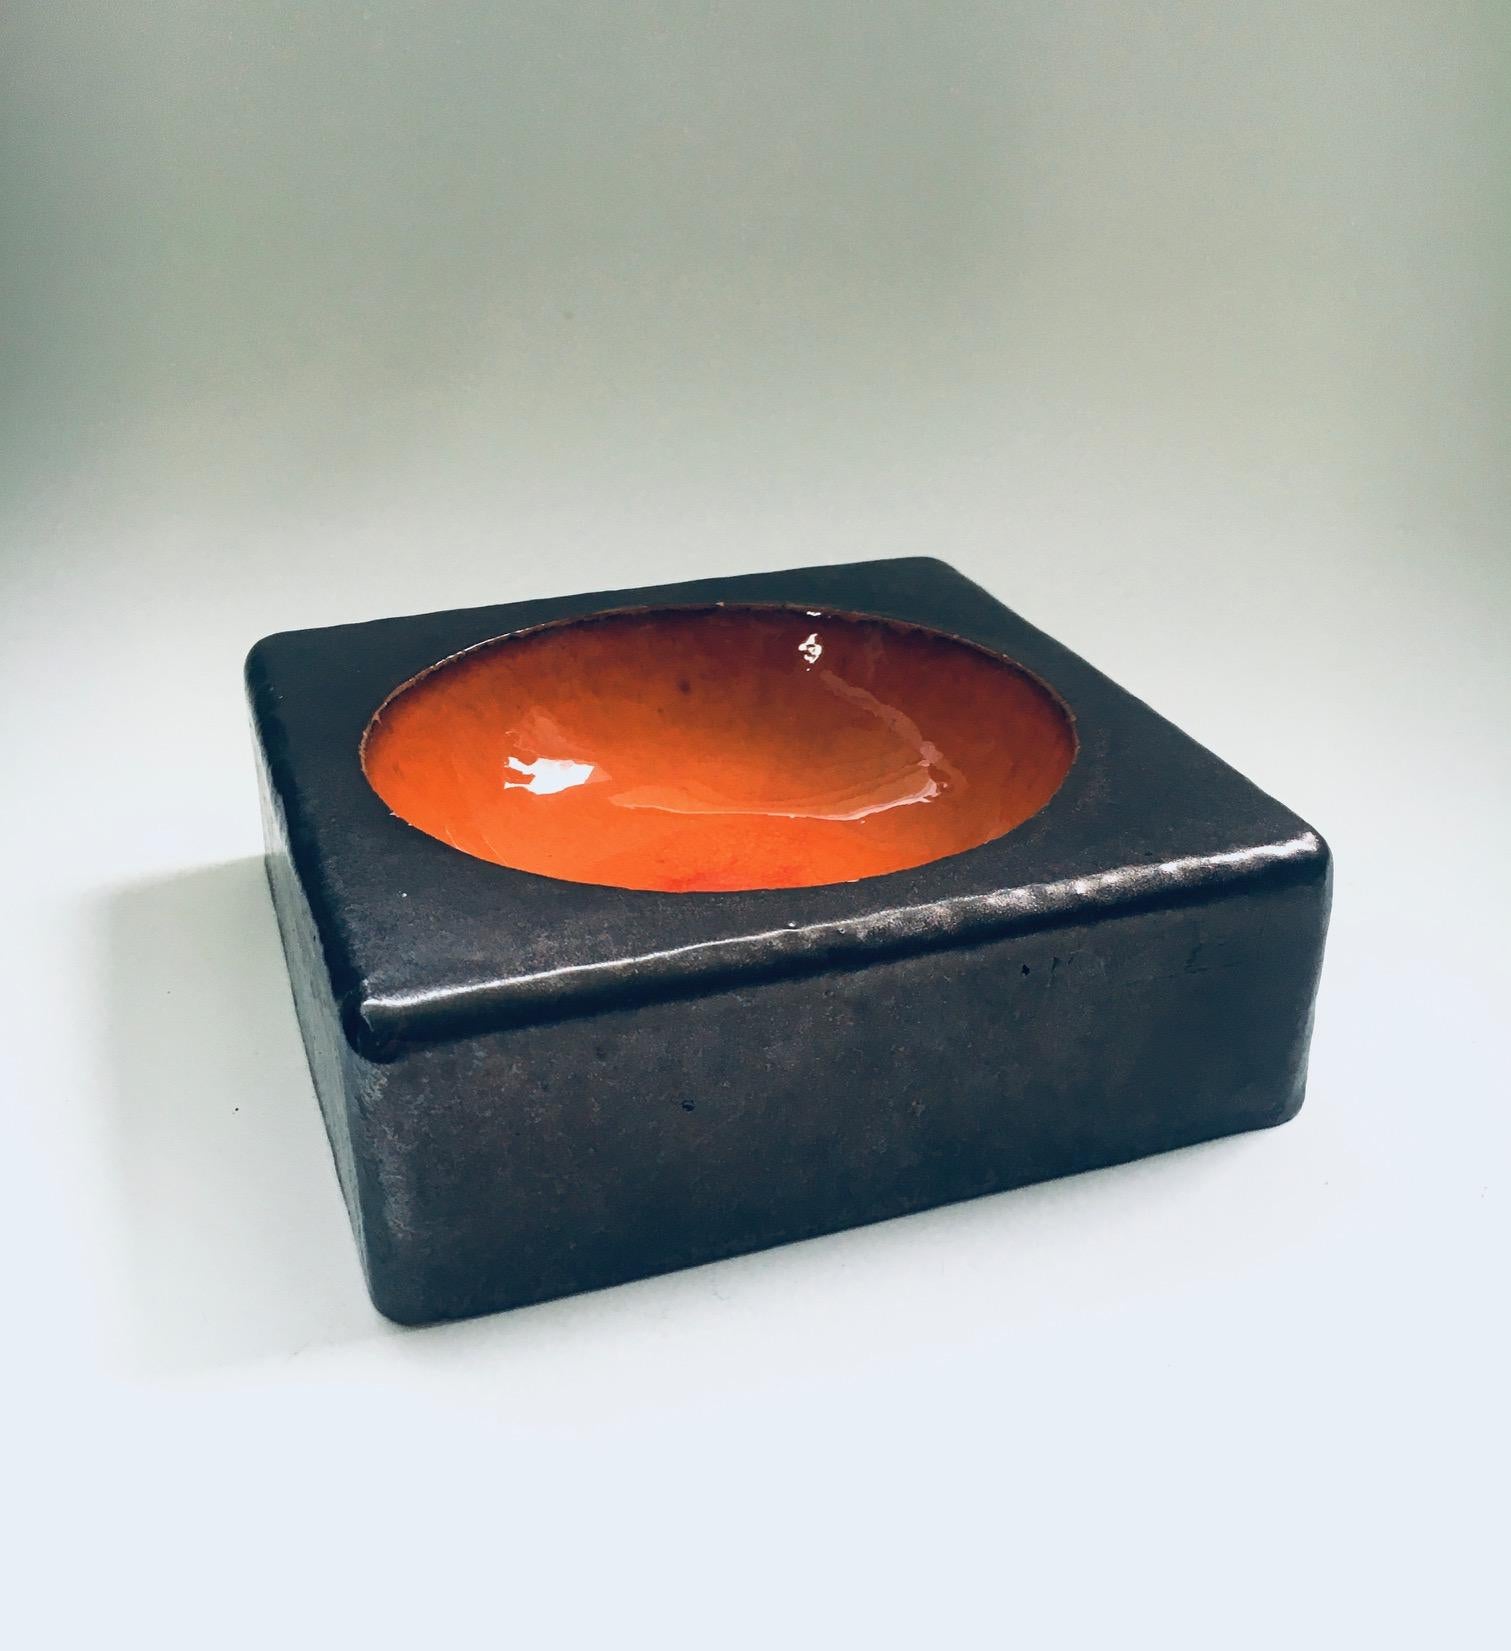 Vintage Art Pottery Studio Handmade Vide Poche Bowl by Jeurissen, 1972 In Good Condition For Sale In Oud-Turnhout, VAN